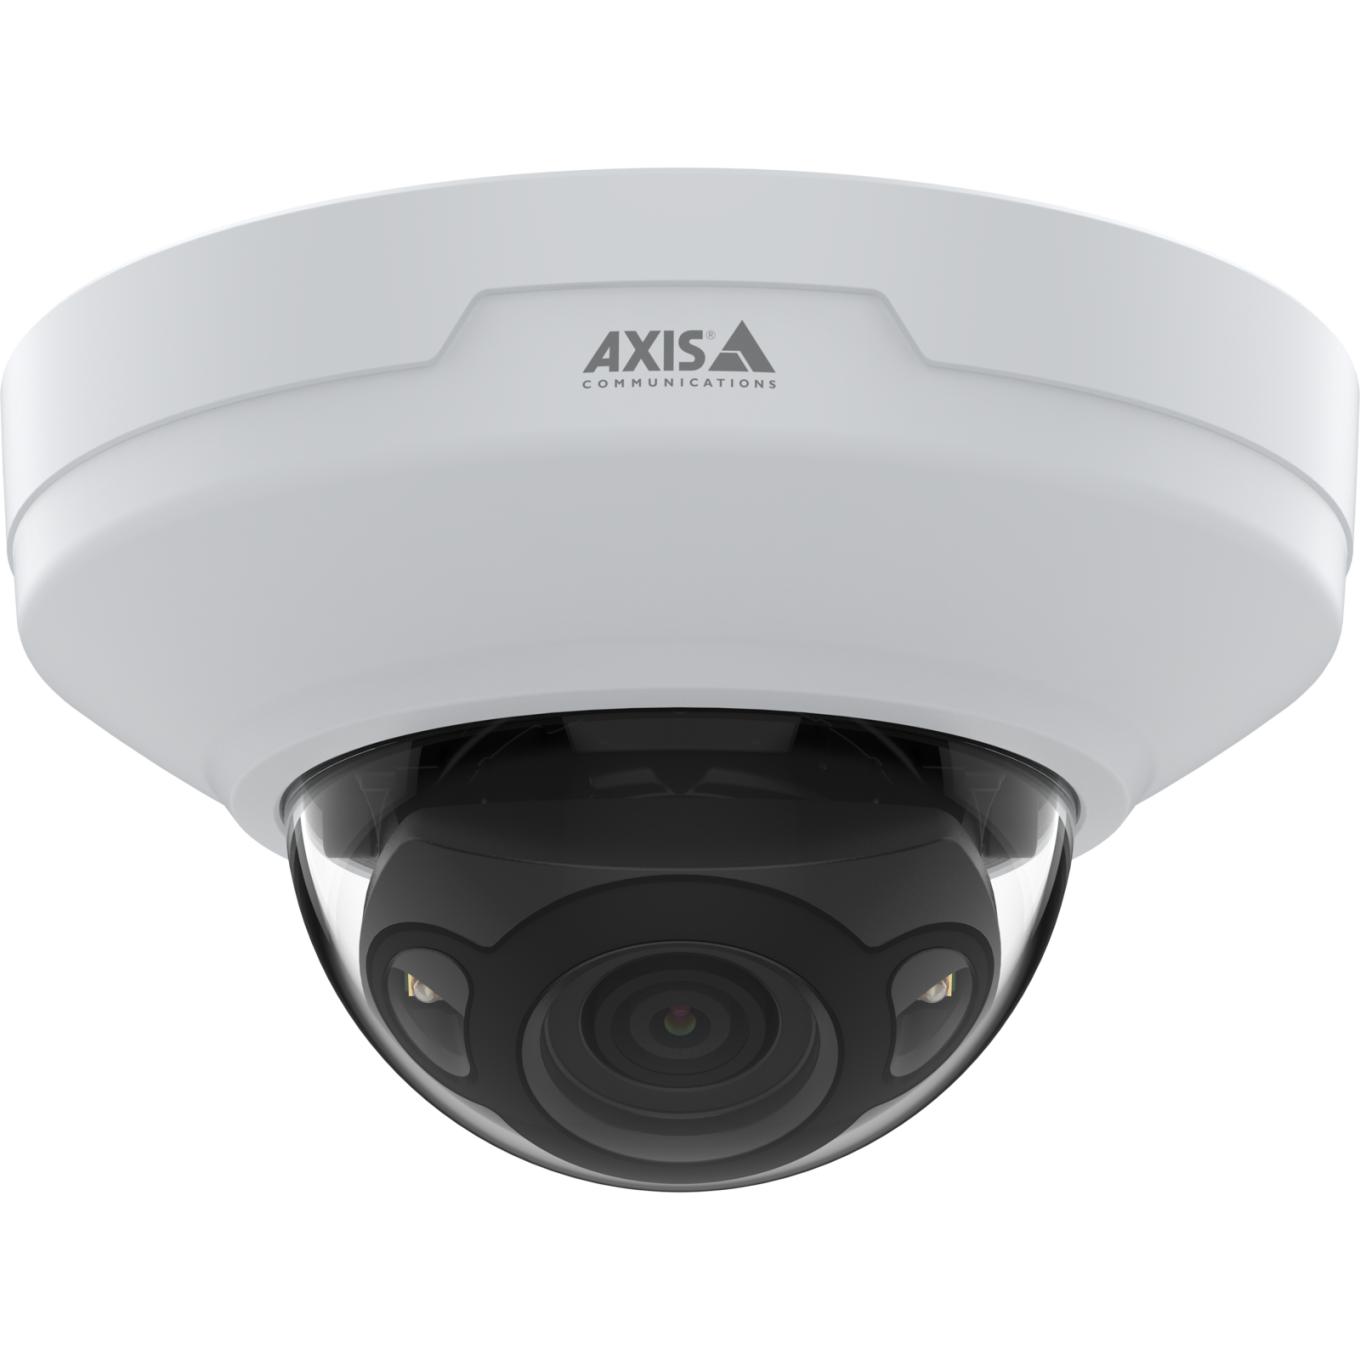 AXIS M4218-LV Dome Camera、天井設置、正面から見た図